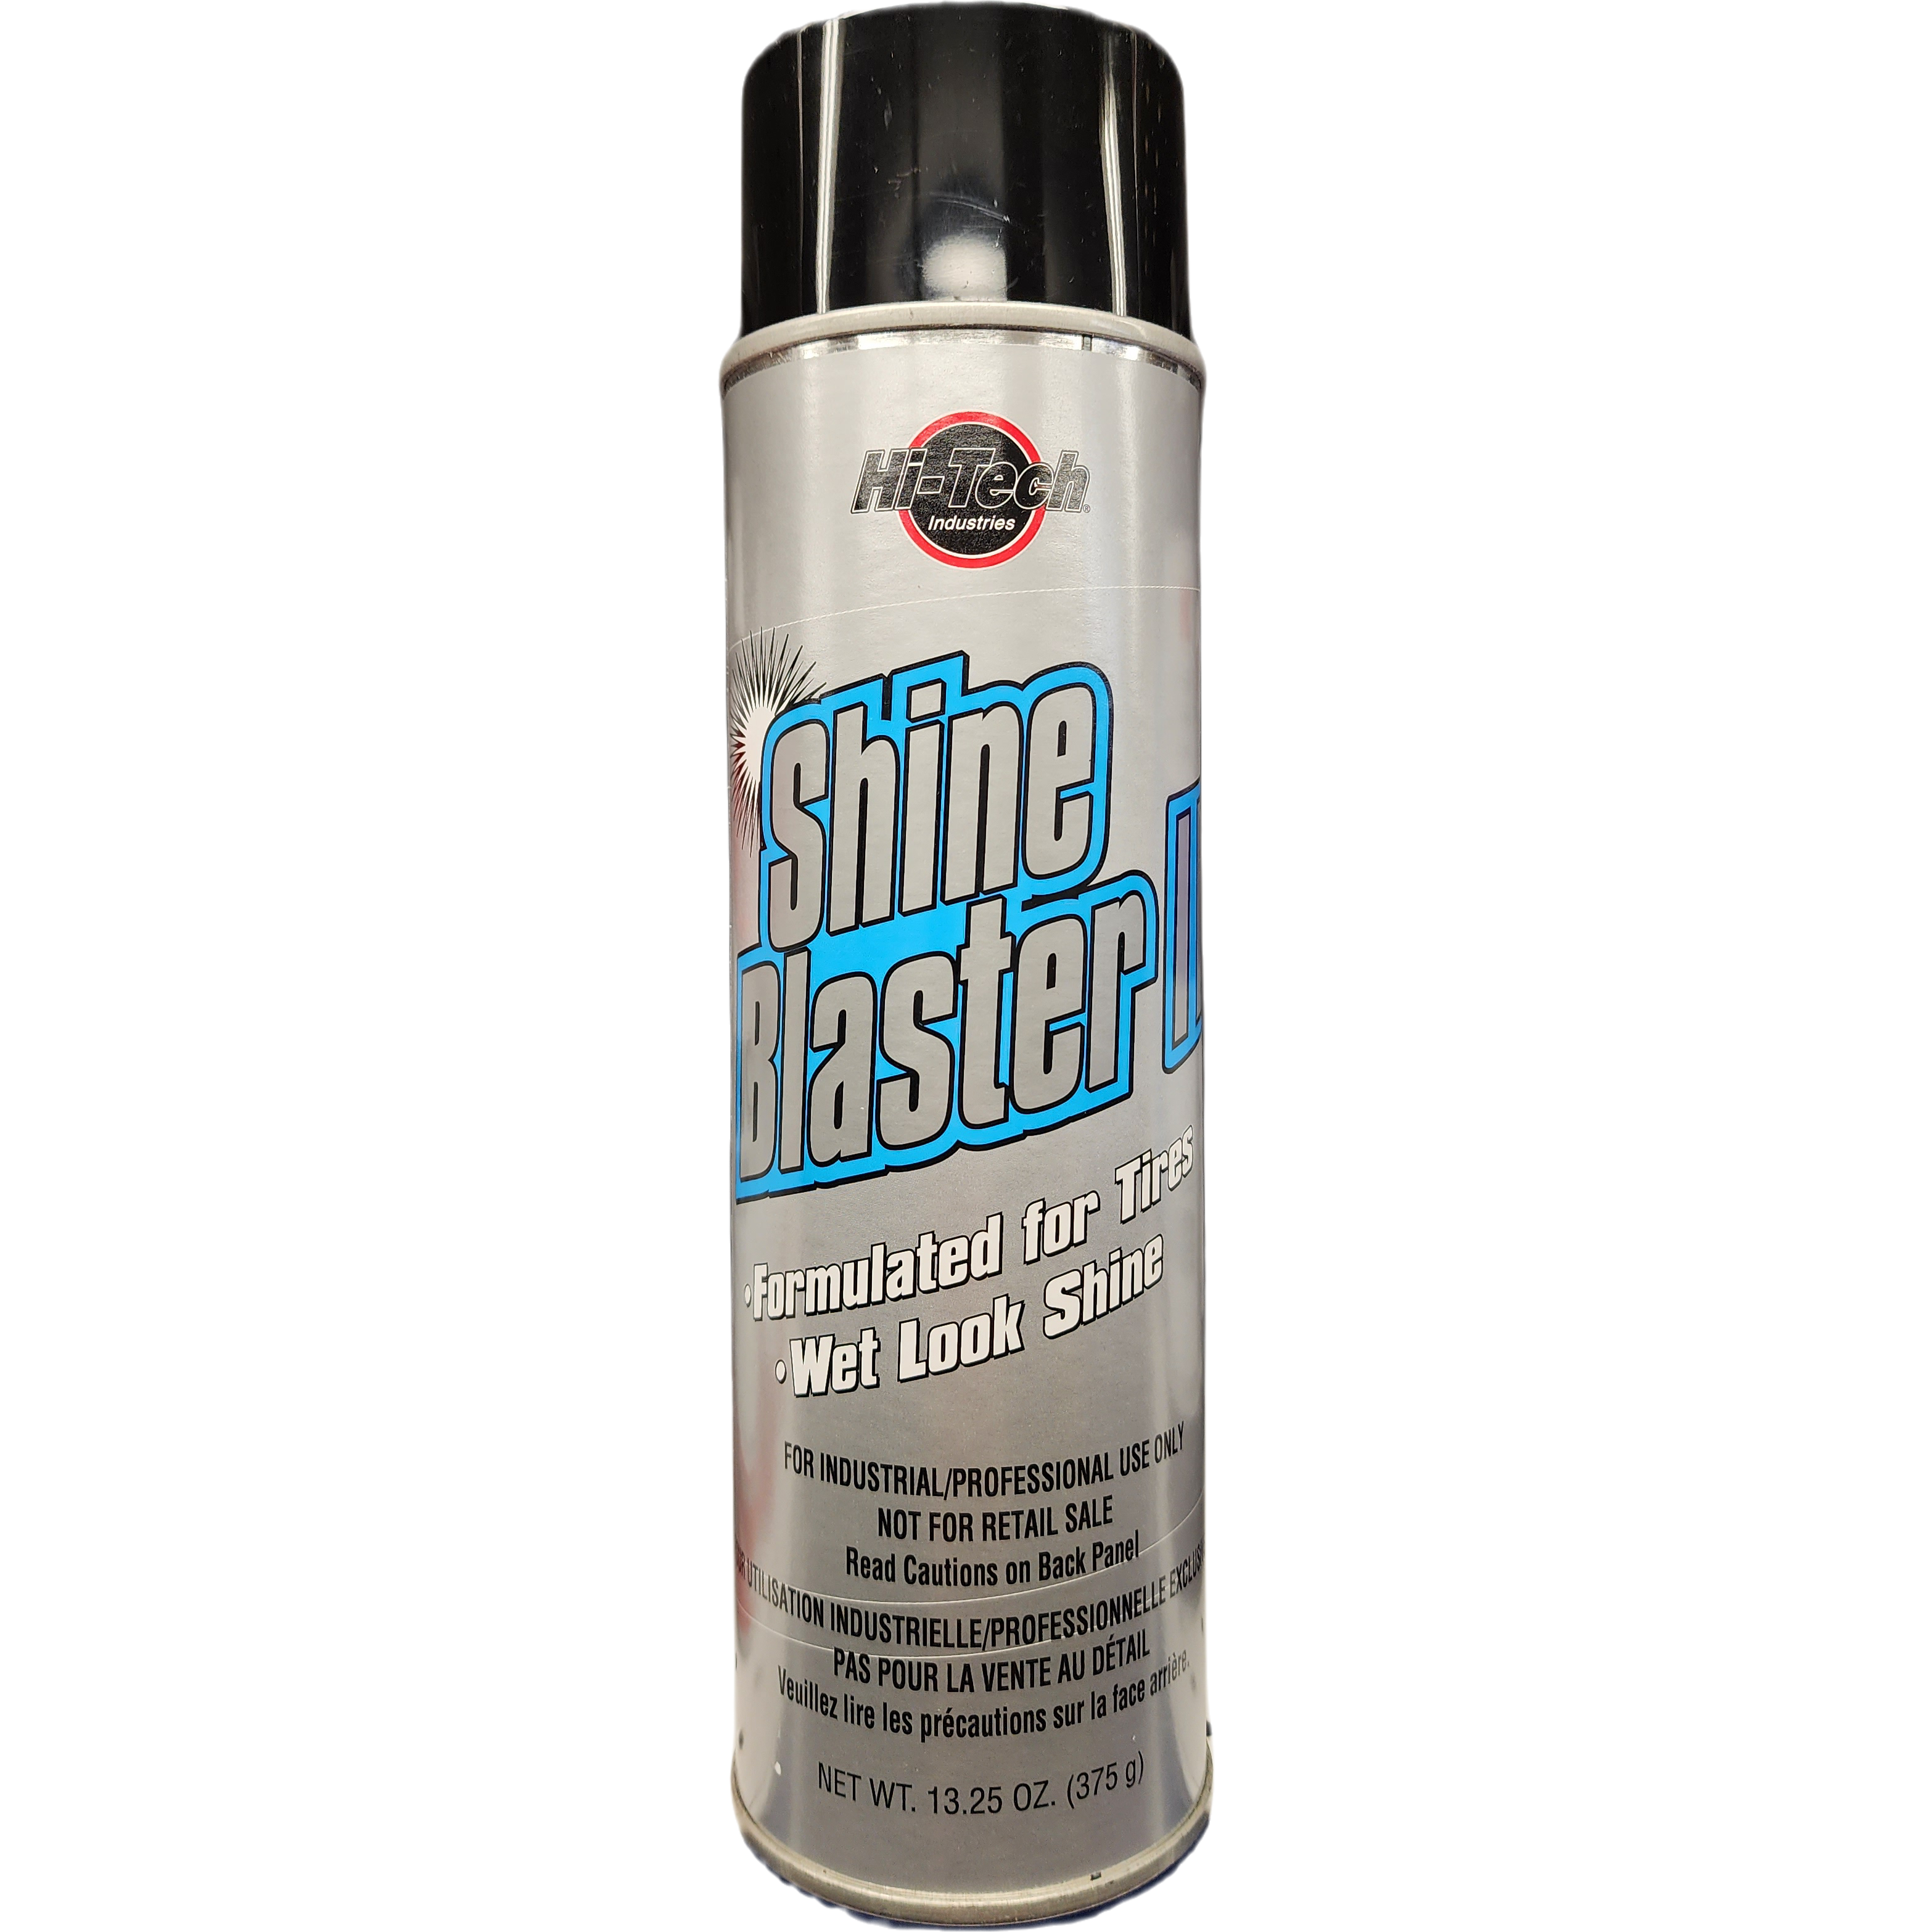 XCP CAR-240 CAR Products Extreme Tire Coat Spray